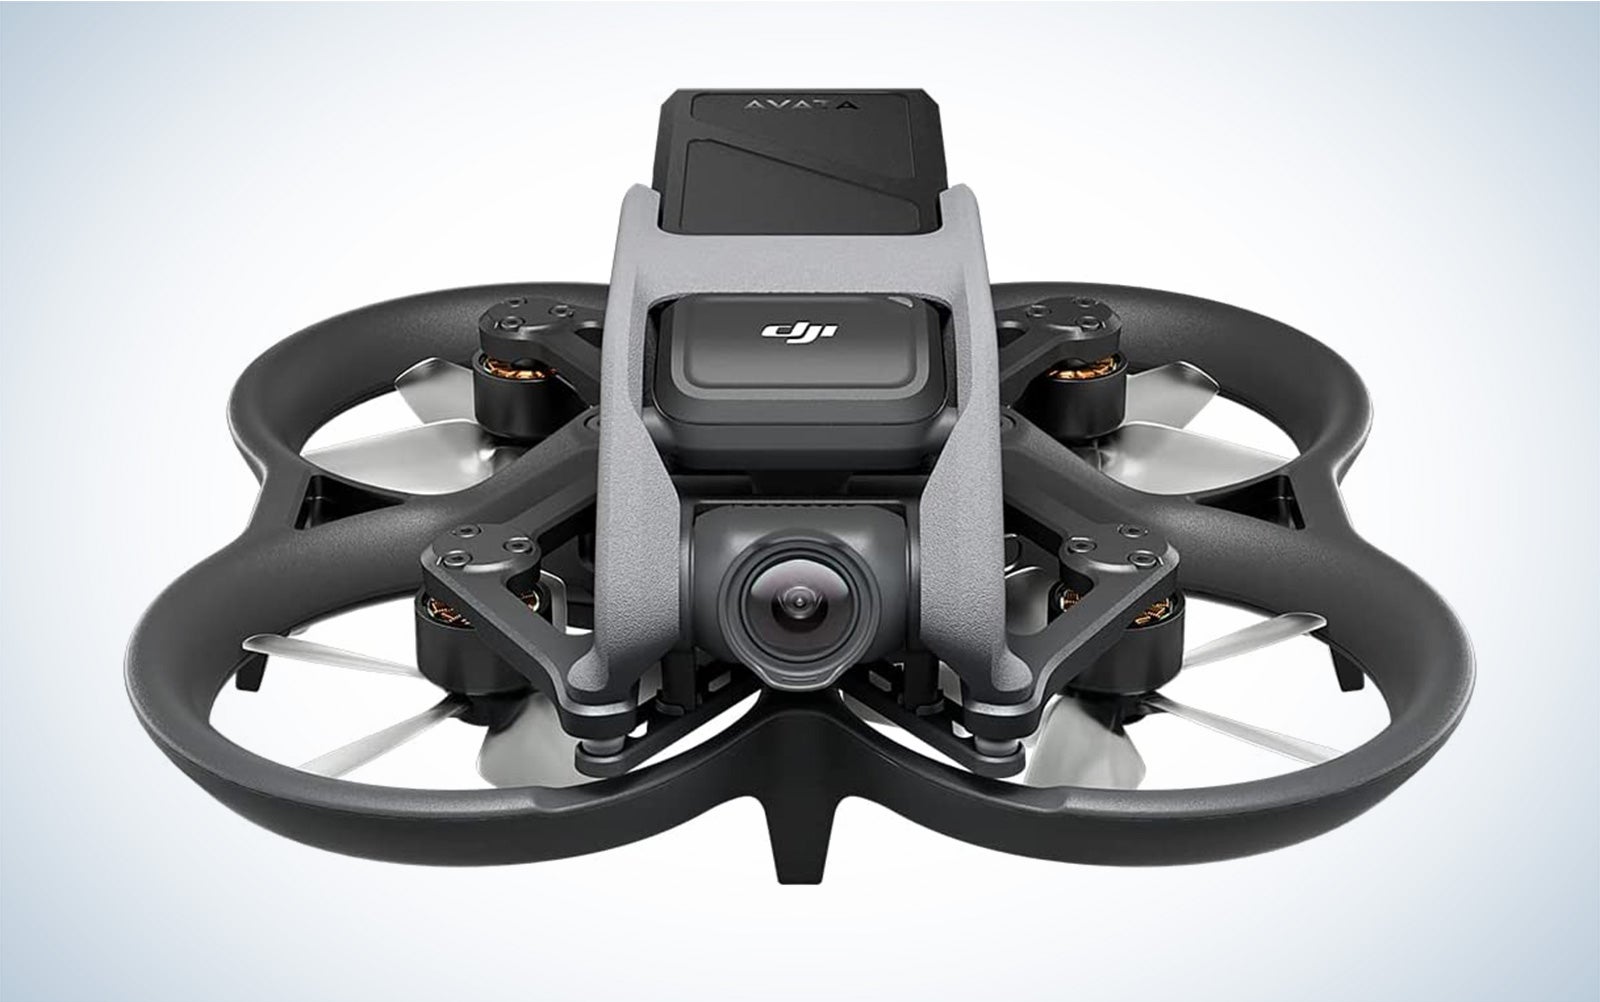 The DJI avata drone by itself with the camera facing forward on a plain background